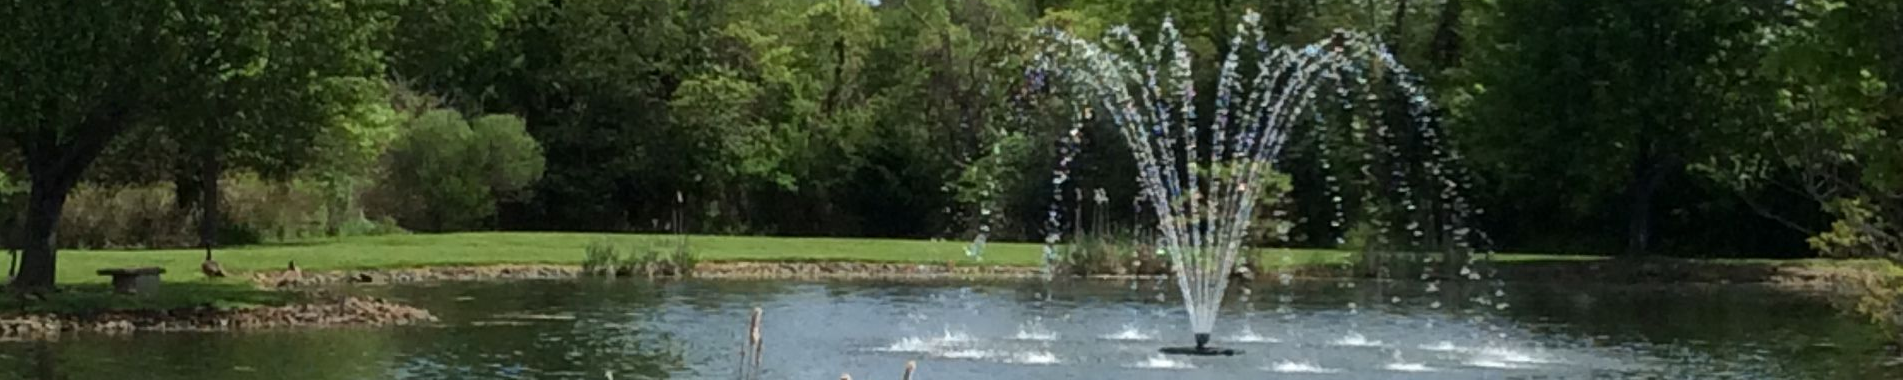 Lake Management Floating Fountains Aeration Irrigation Pump Systems Dallas Fort Worth Texas